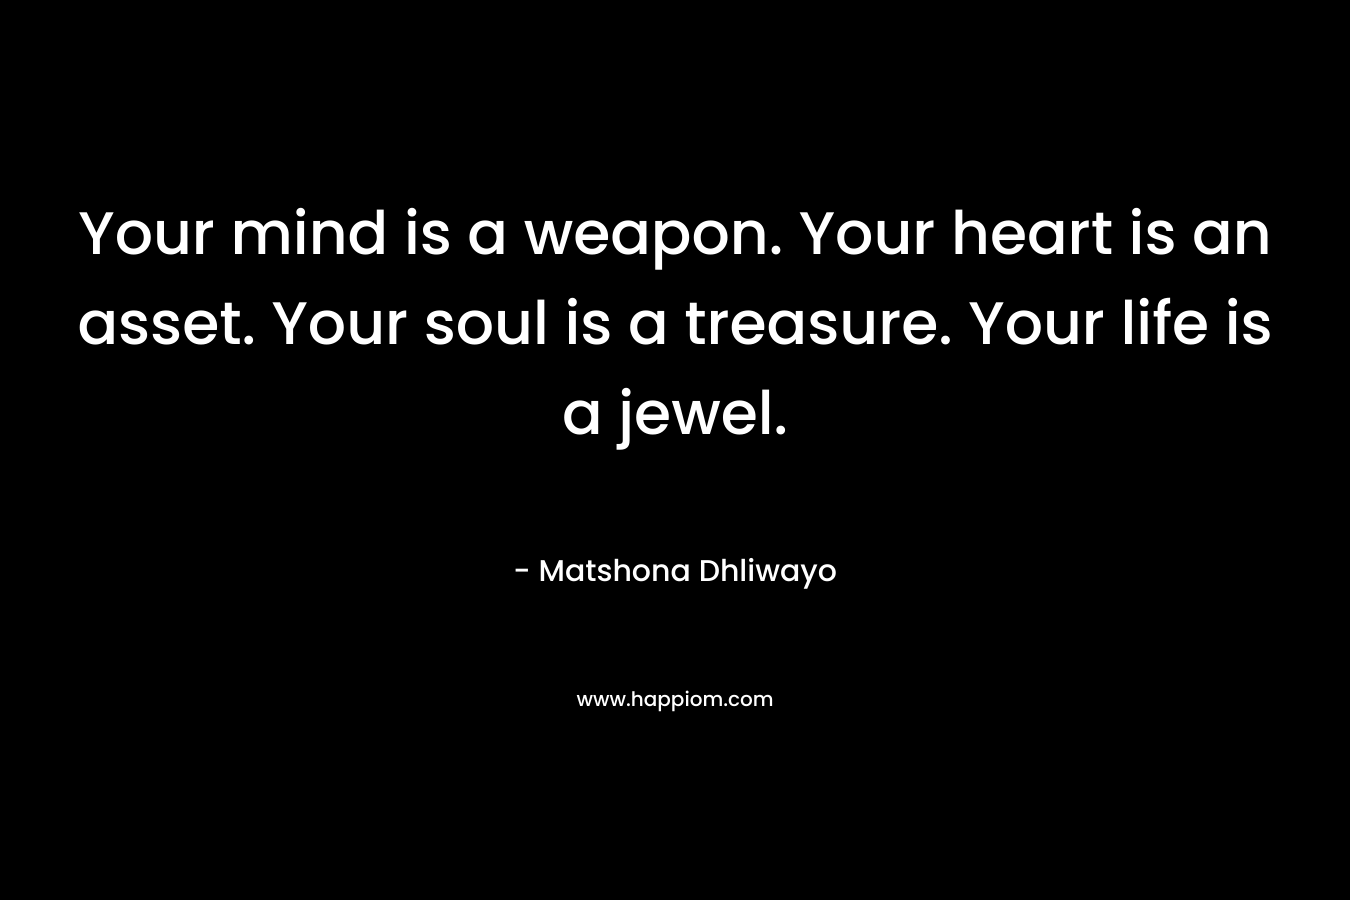 Your mind is a weapon. Your heart is an asset. Your soul is a treasure. Your life is a jewel. – Matshona Dhliwayo